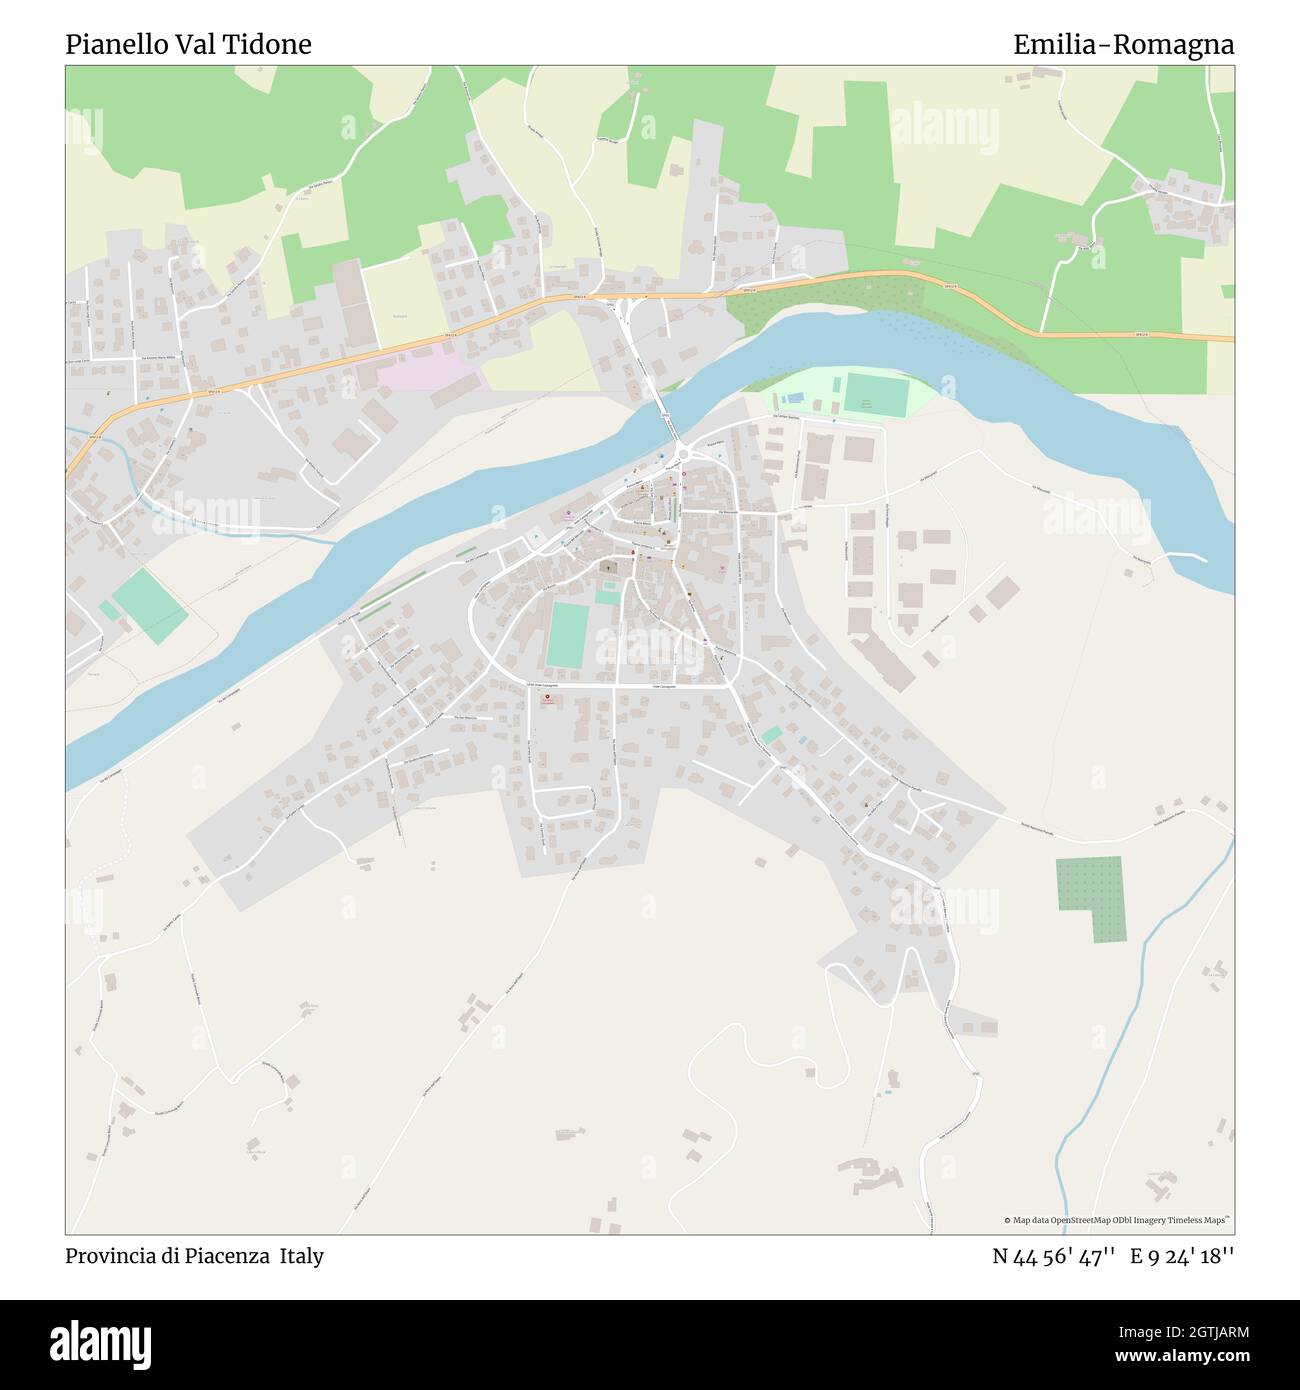 Pianello Val Tidone, Provincia di Piacenza, Italy, Emilia-Romagna, N 44 56'  47'', E 9 24' 18'', map, Timeless Map published in 2021. Travelers,  explorers and adventurers like Florence Nightingale, David Livingstone,  Ernest